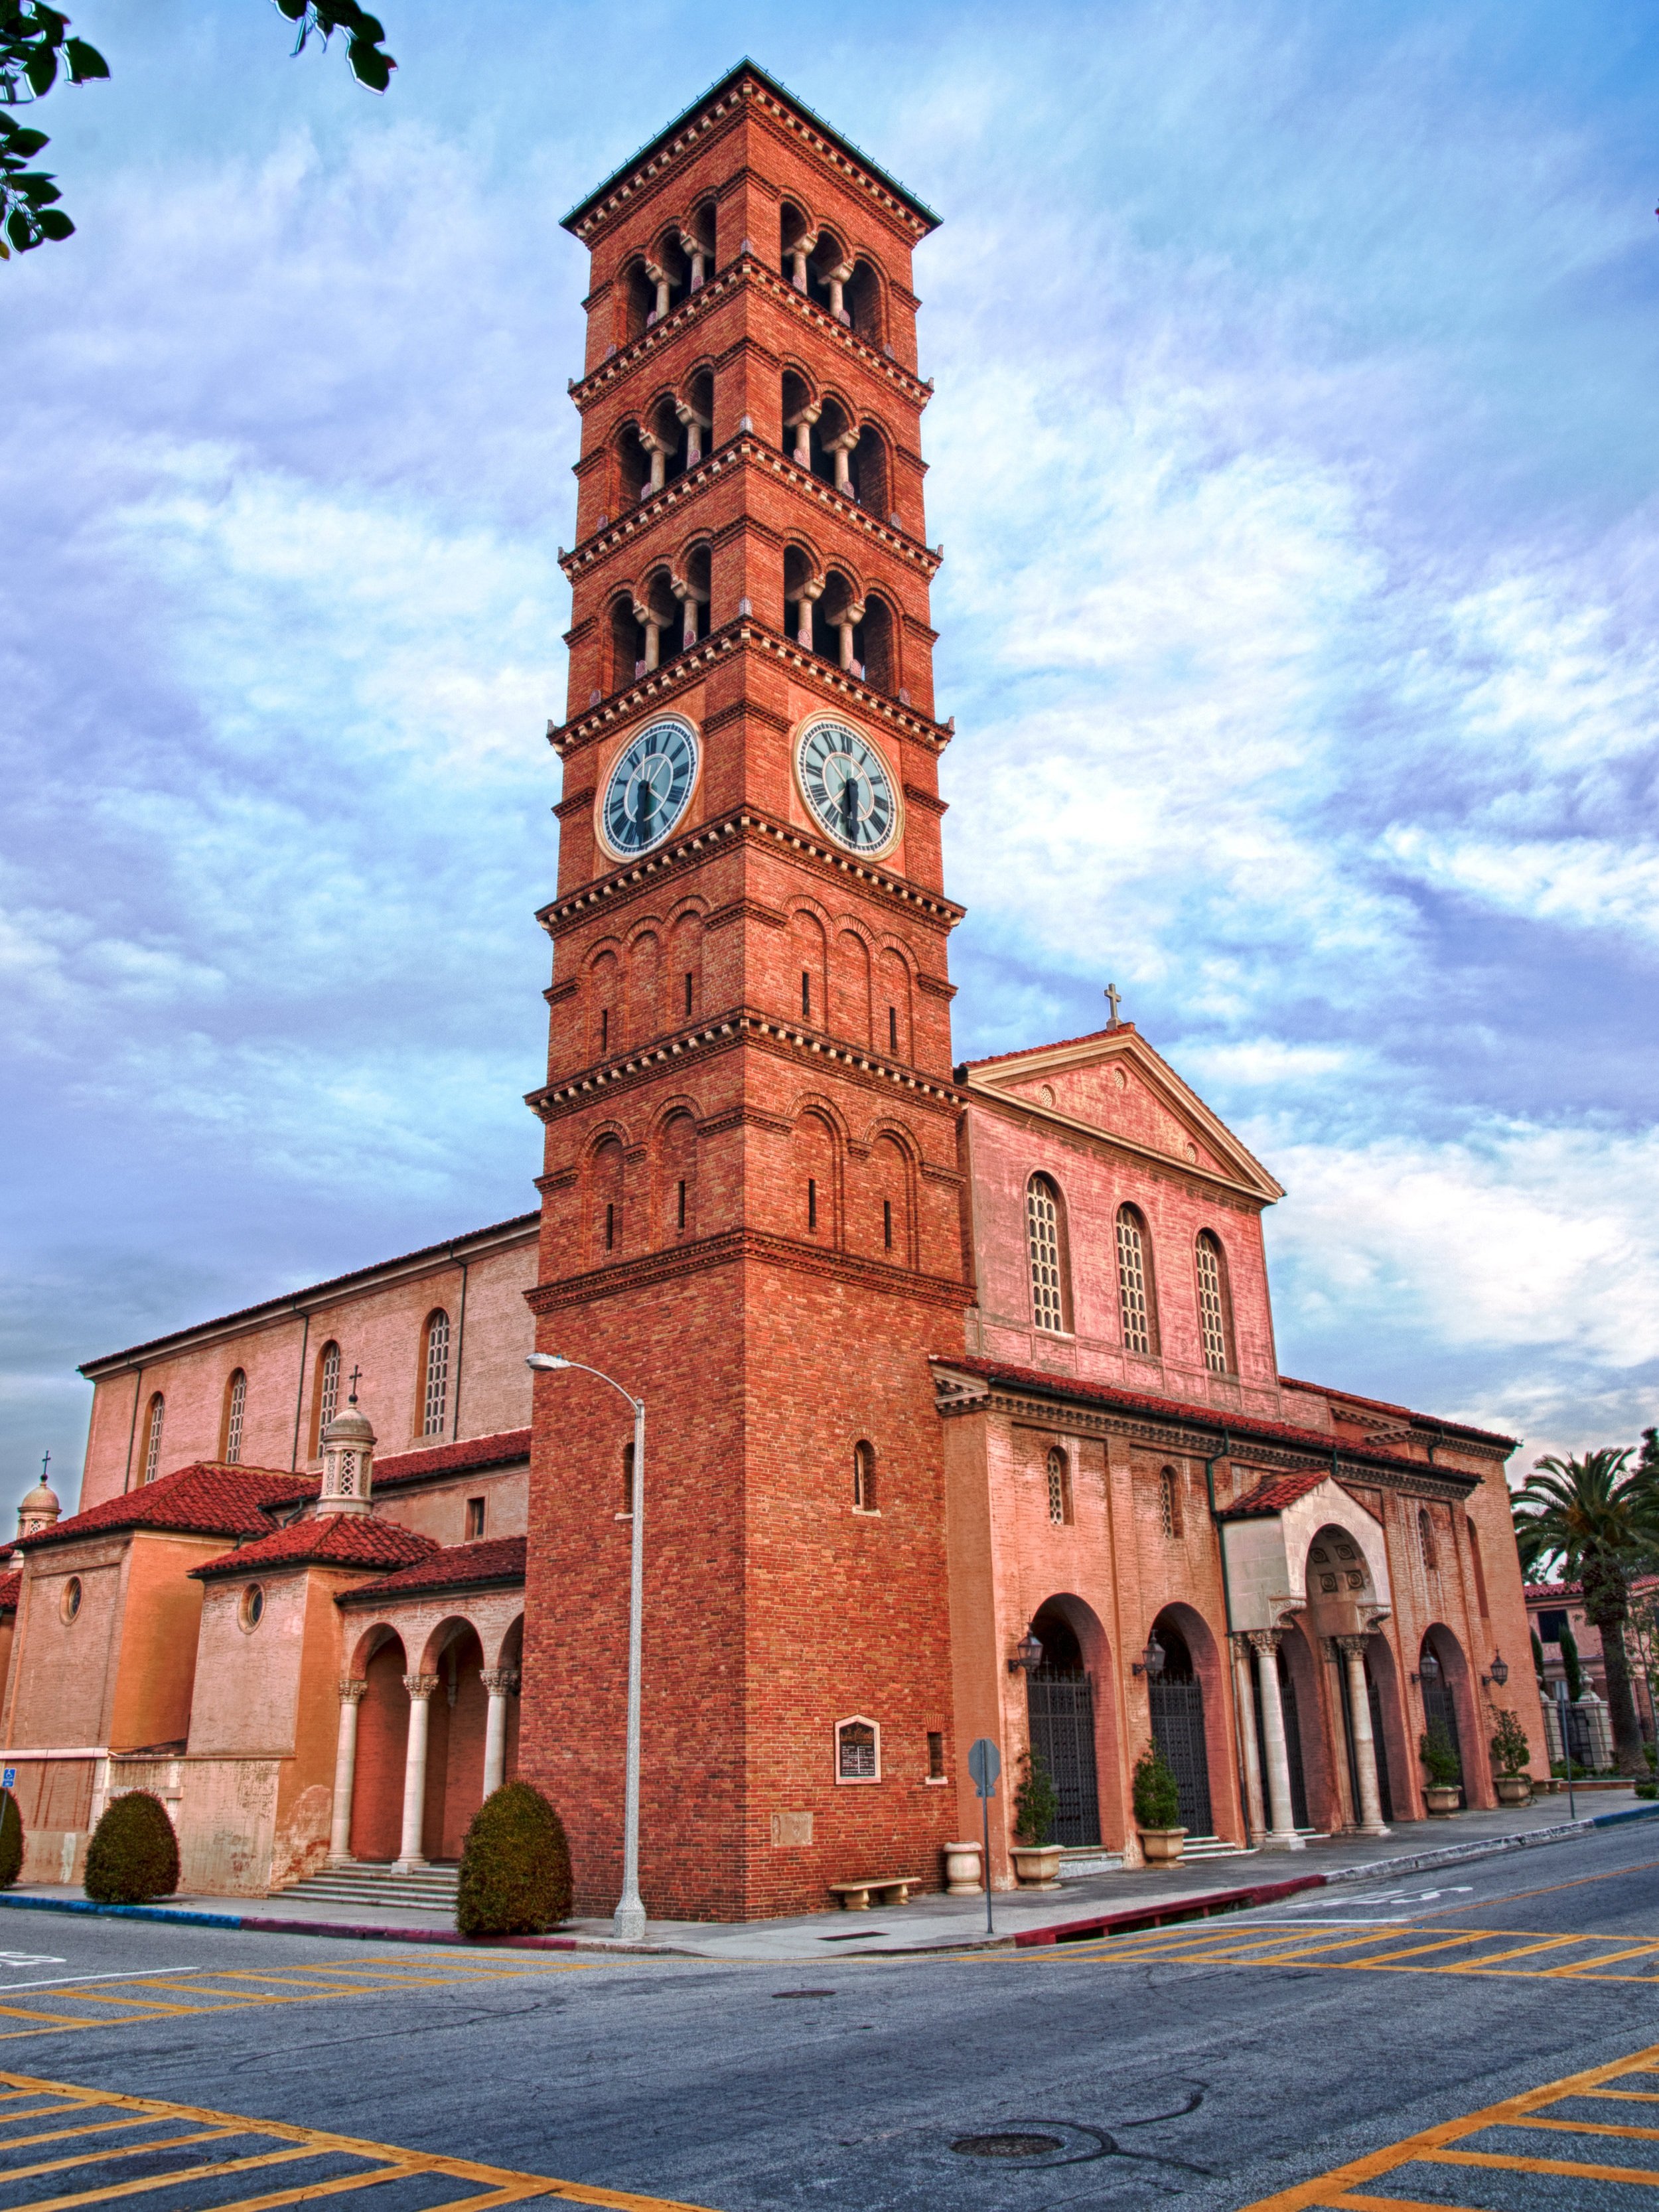  St. Andrew Roman Catholic Church, an architectural treasure, nurtures a diverse and welcoming community dedicated to connecting faith in Jesus Christ with service to others.&nbsp;  La Iglesia Católica Romana de San Andrés, un tesoro de arquitectura,